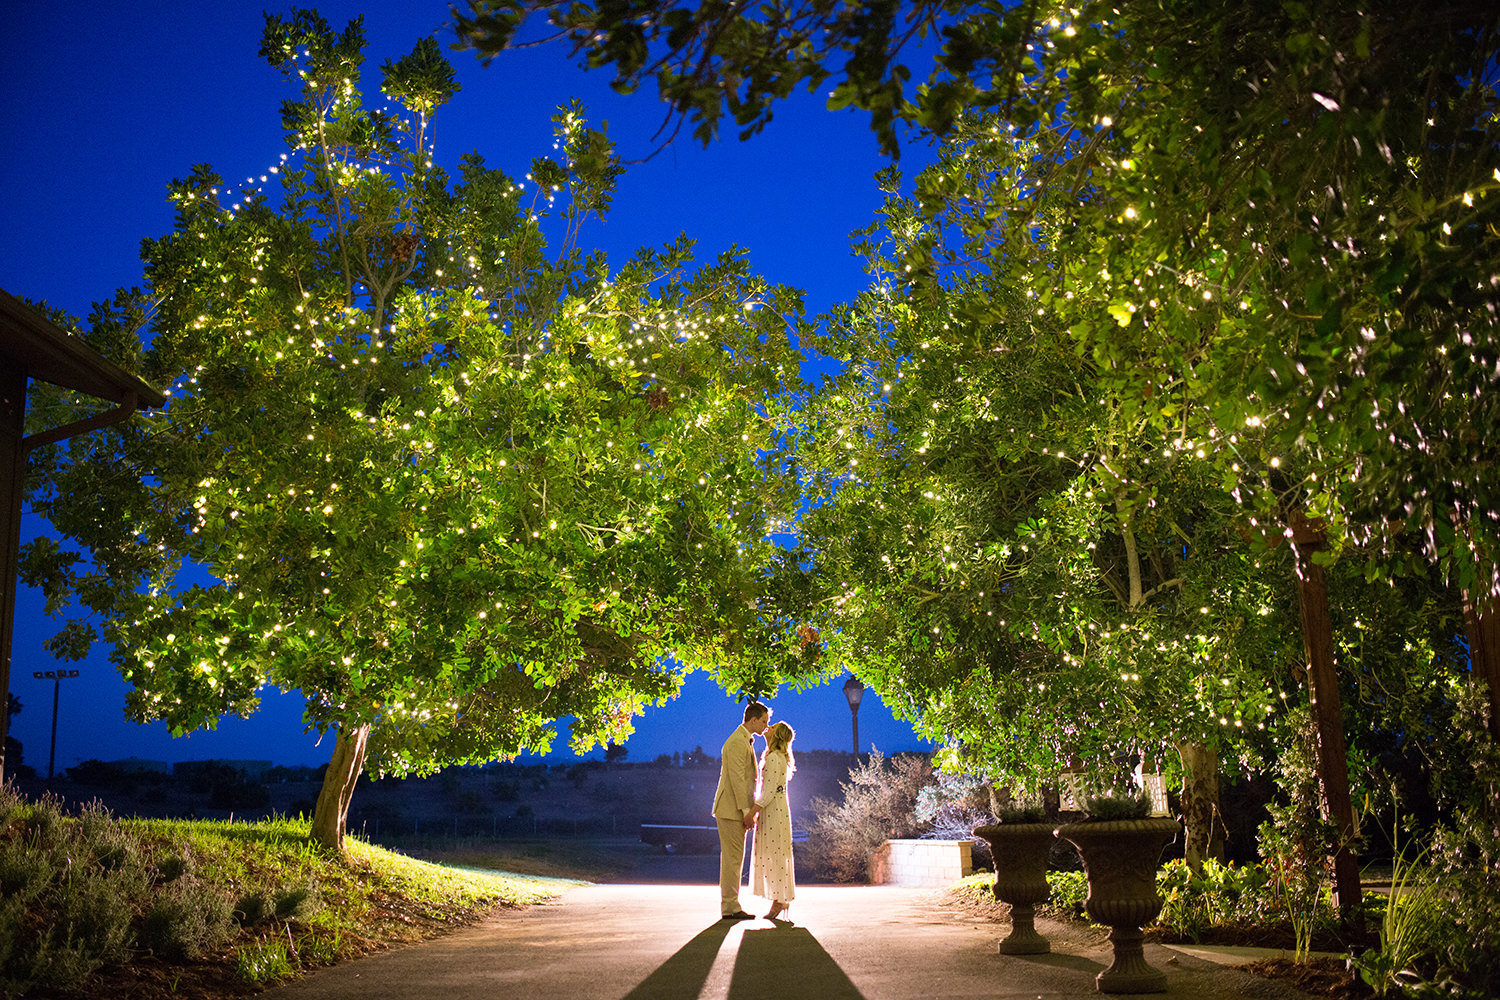 night image of bride and groom with beautiful trees